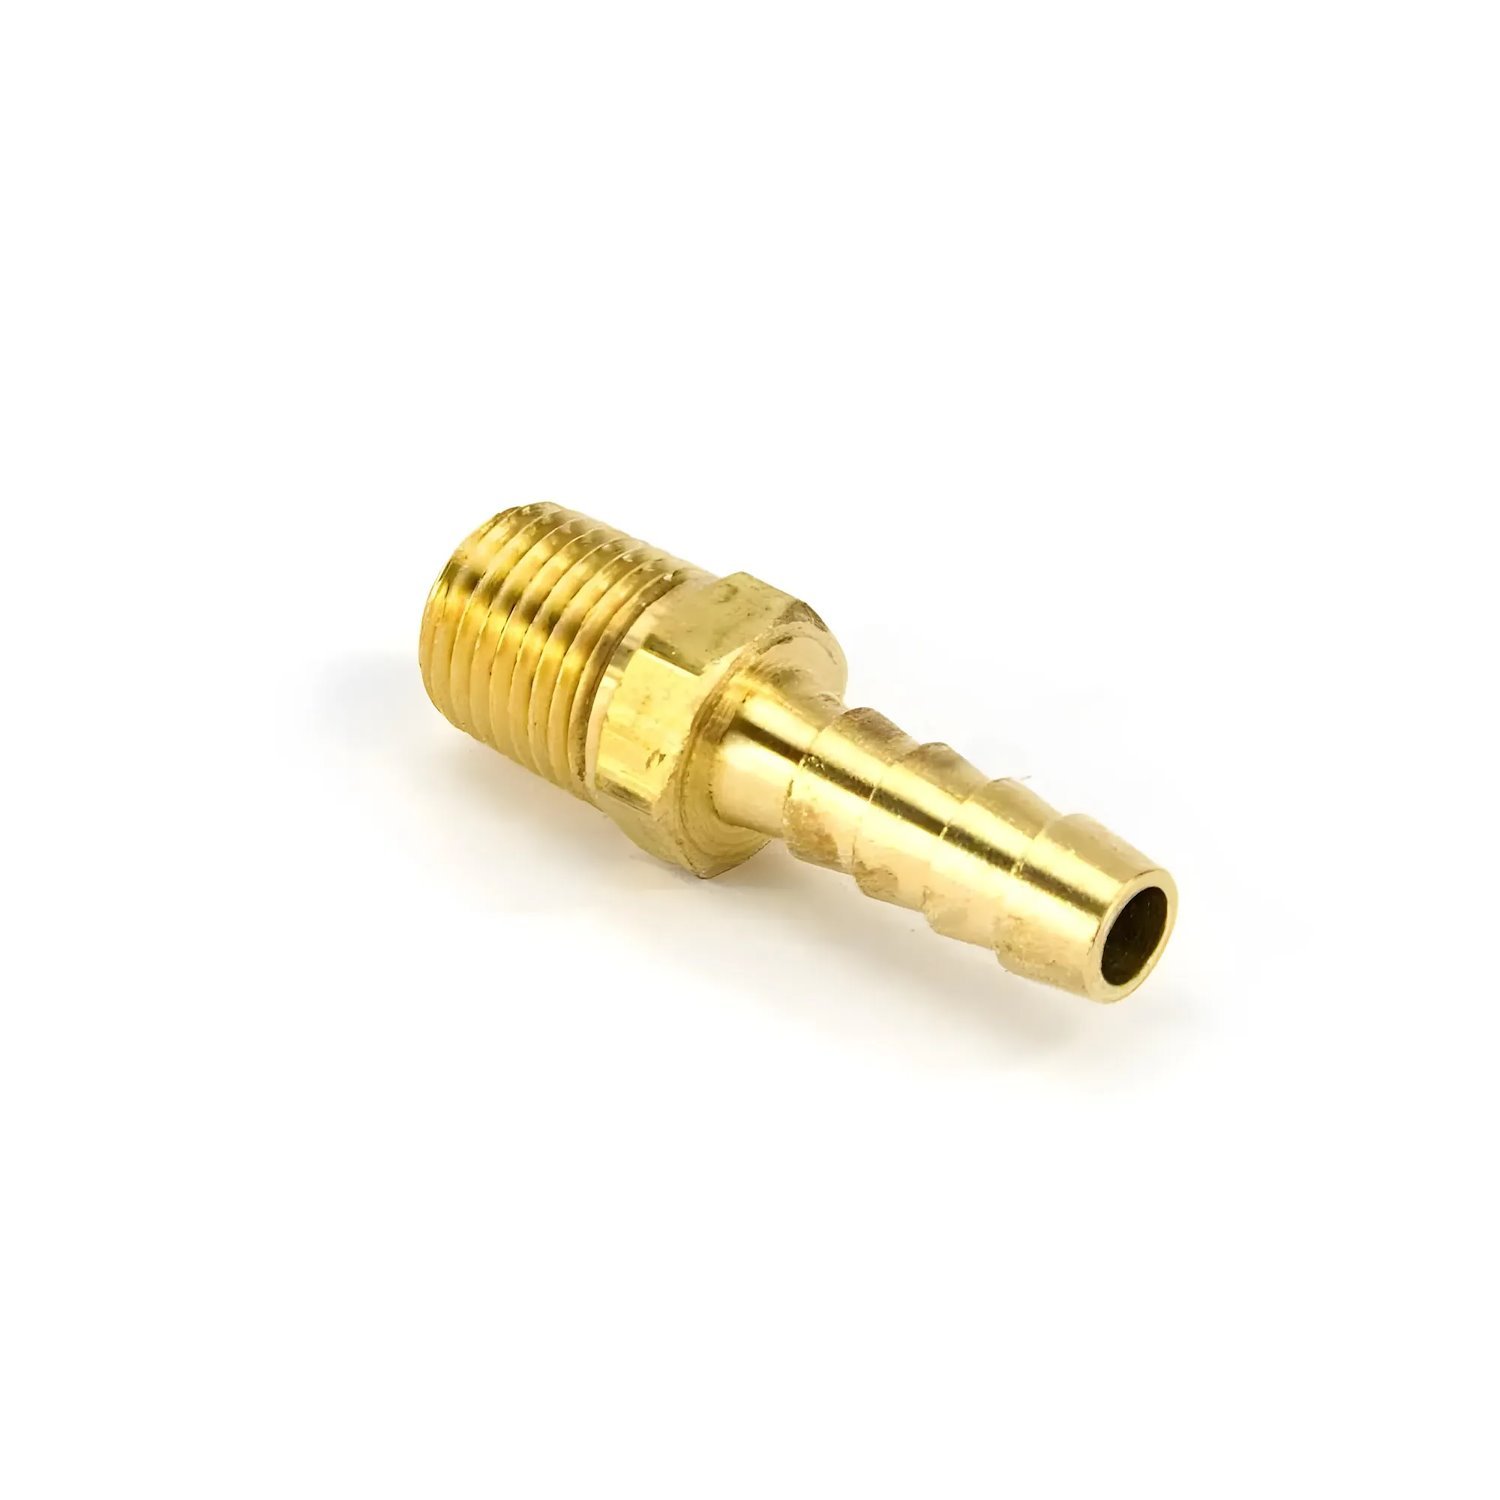 00-01921-B 1/4 in. NPT x 5/16 in. Straight Hose Barb Fitting, Male/Male